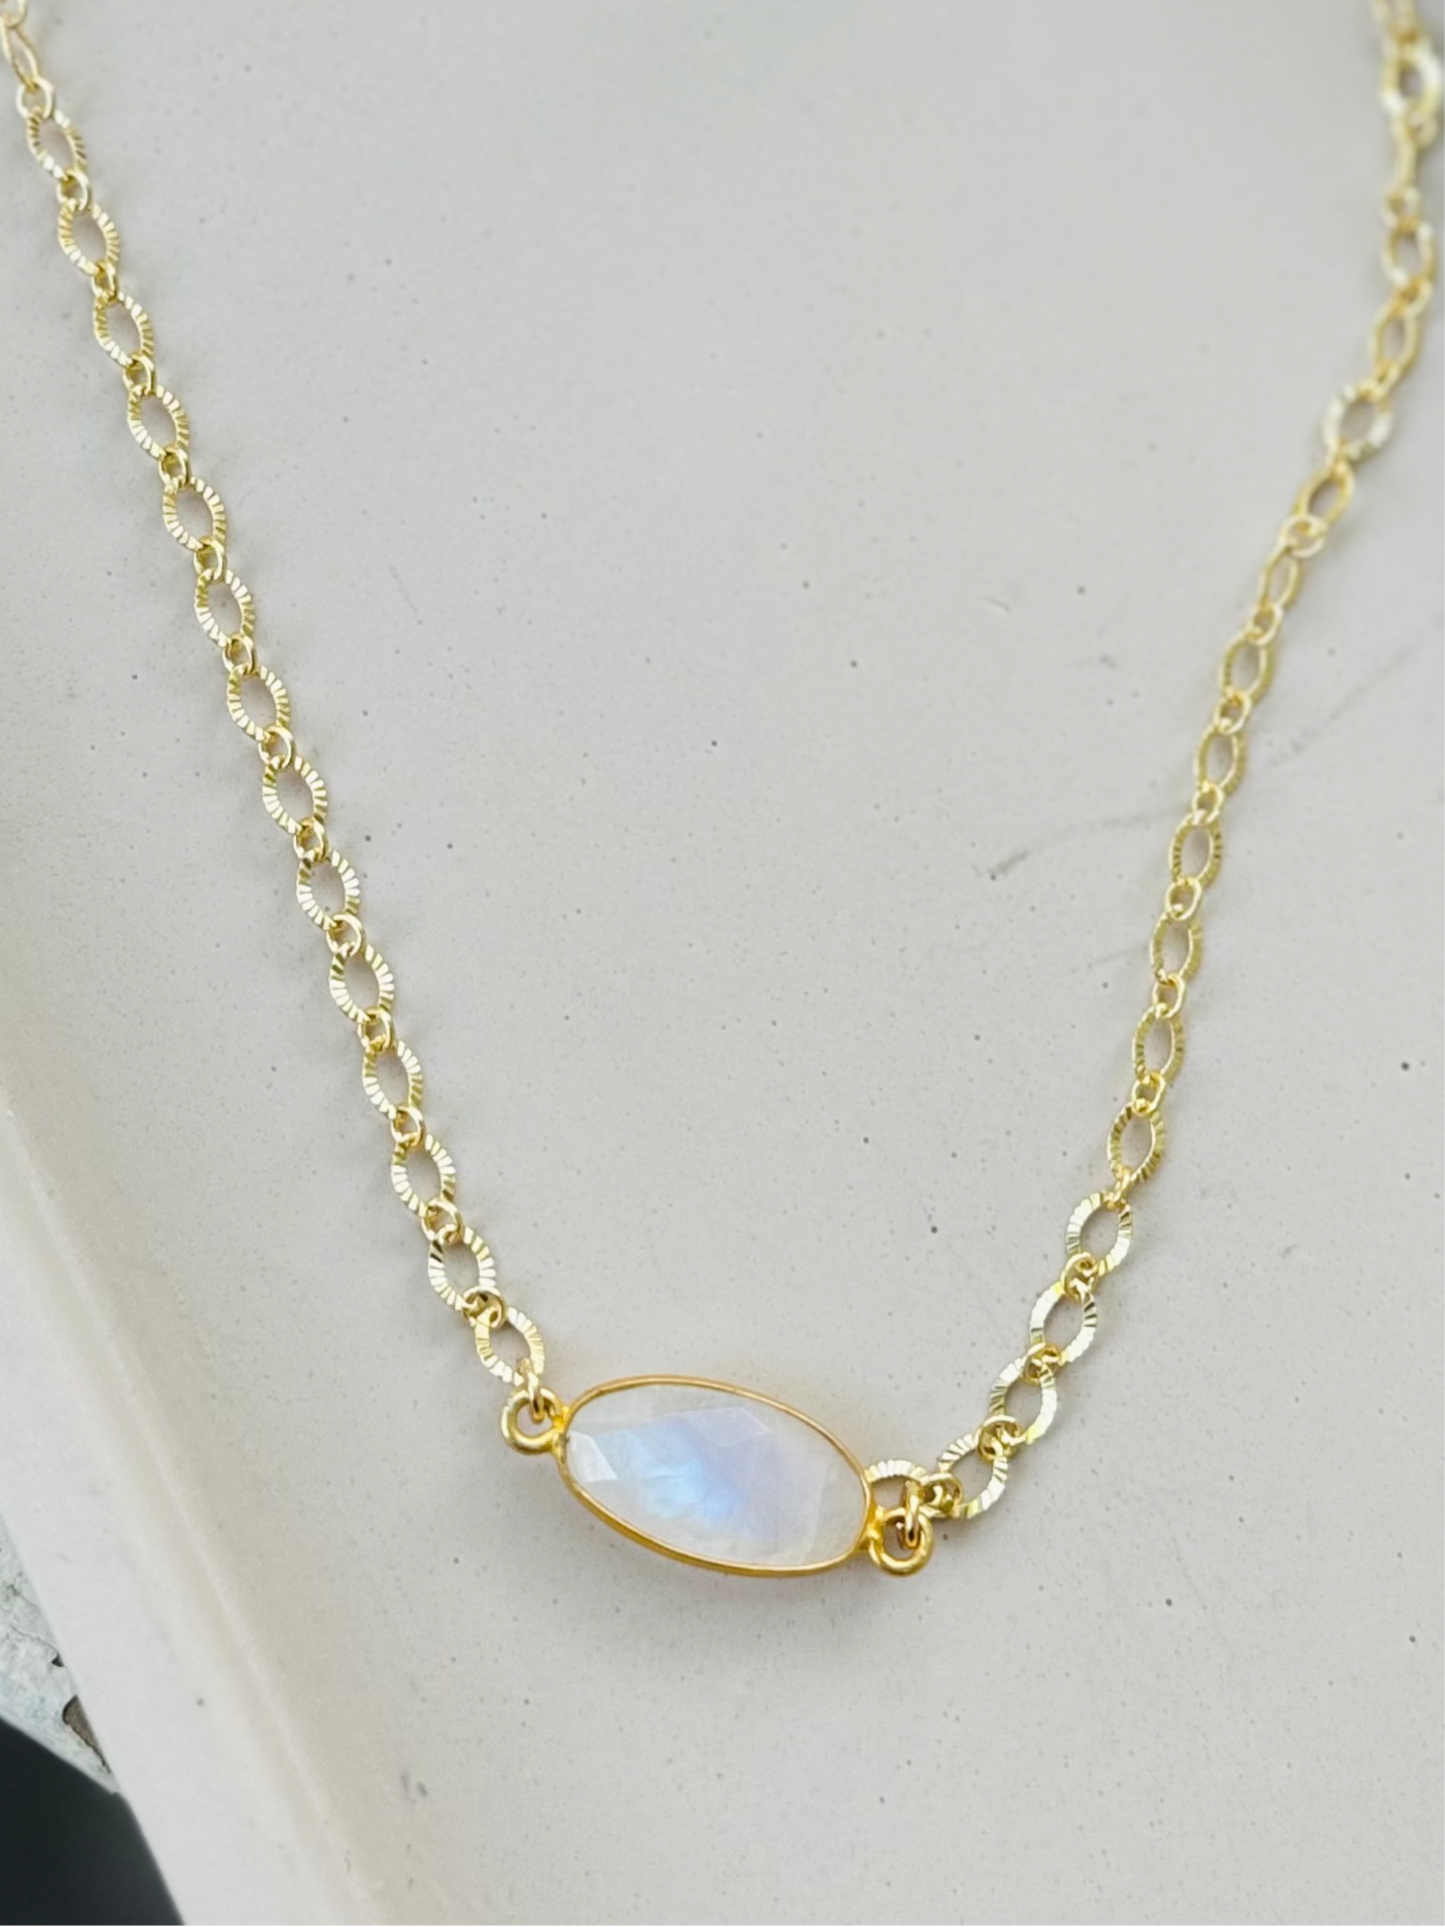 Moonstone + Gold Pendant Necklace